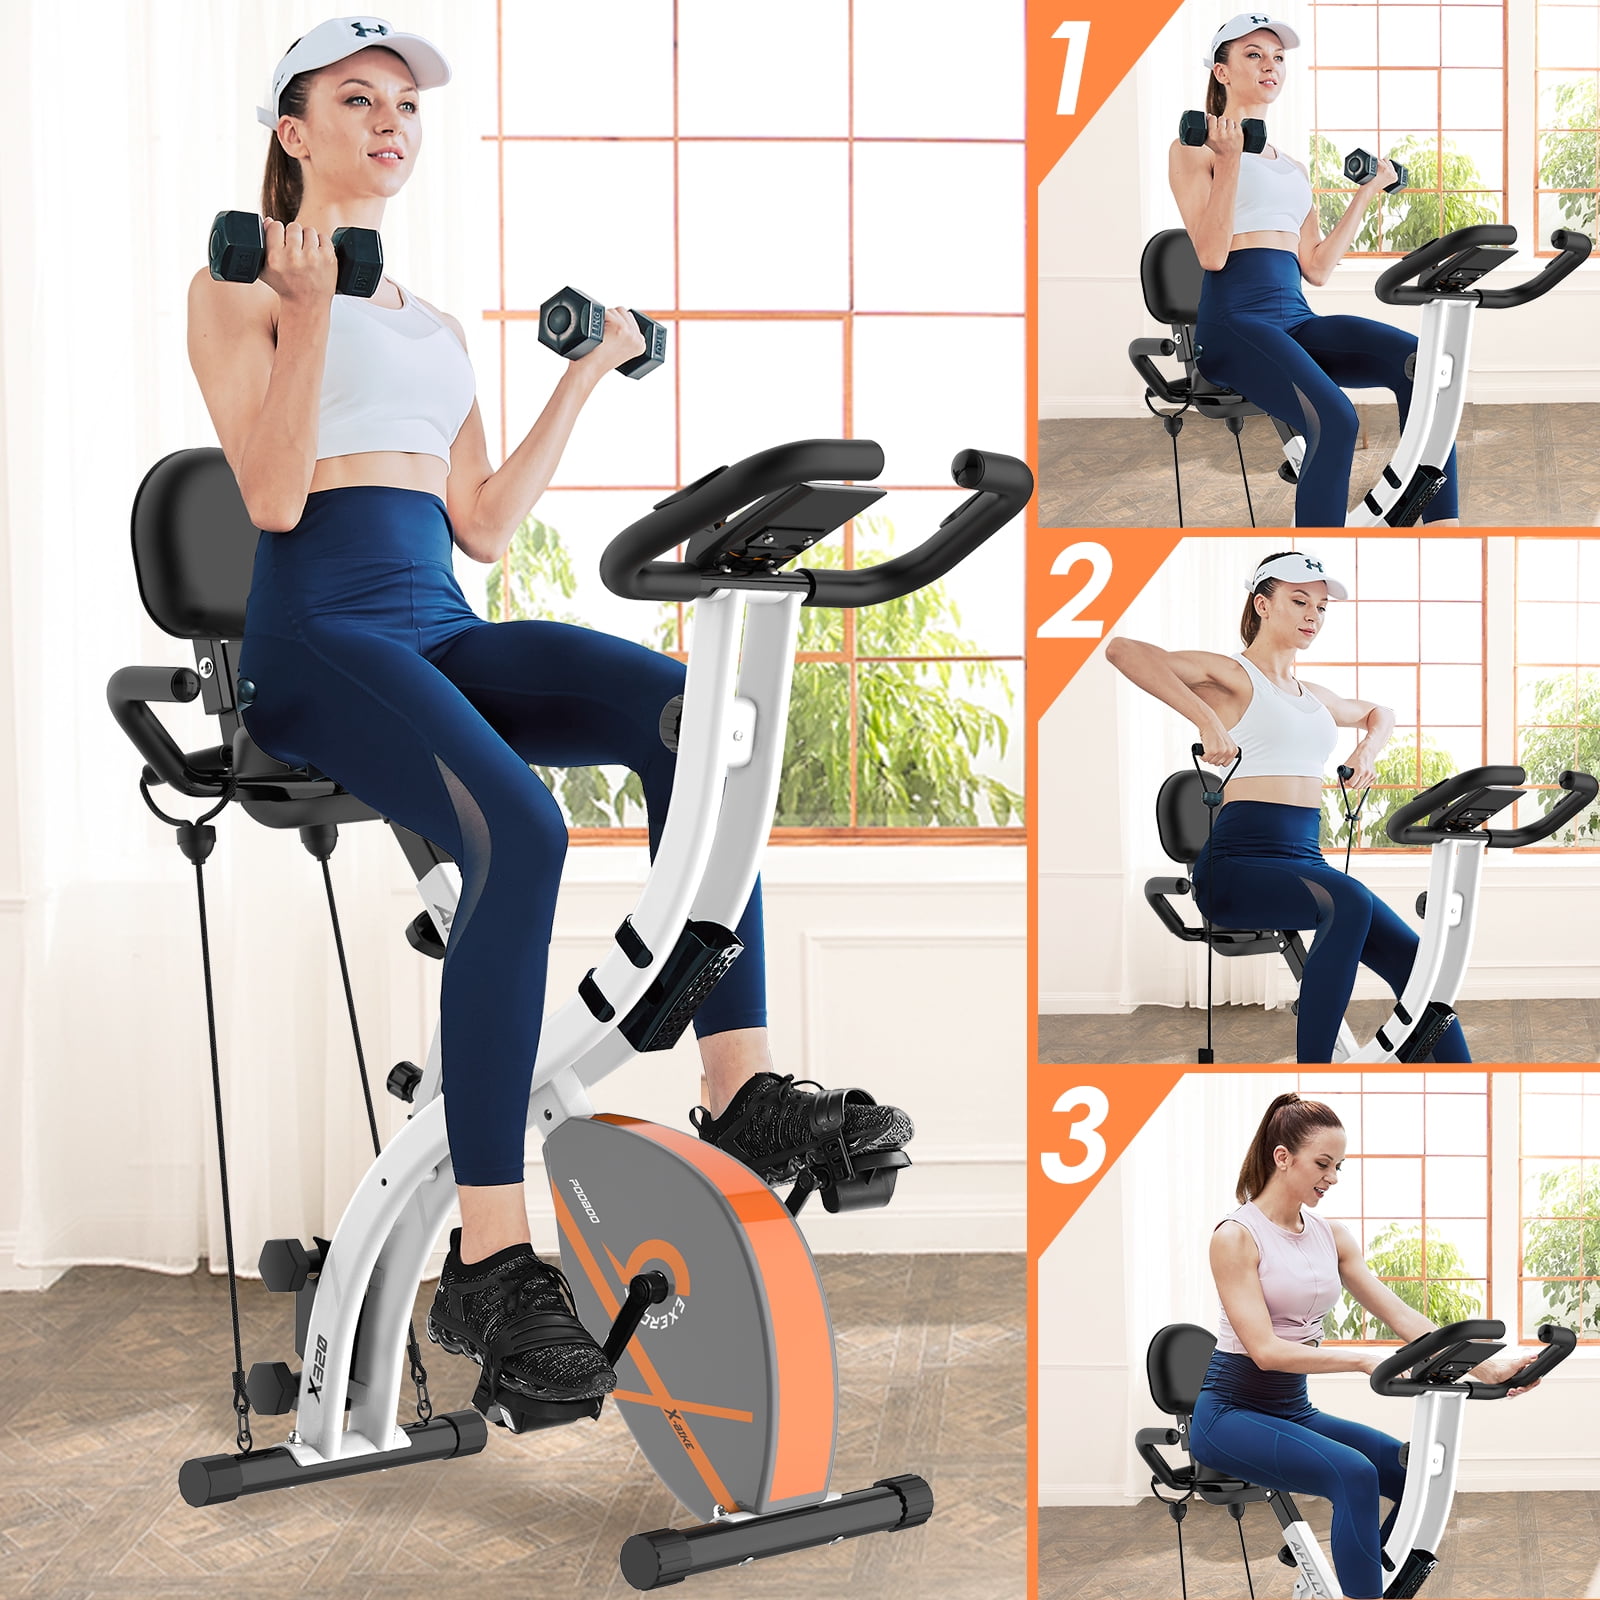 Pooboo 3in1 Folding Exercise Bike Indoor Cycling Bike Stationary ...